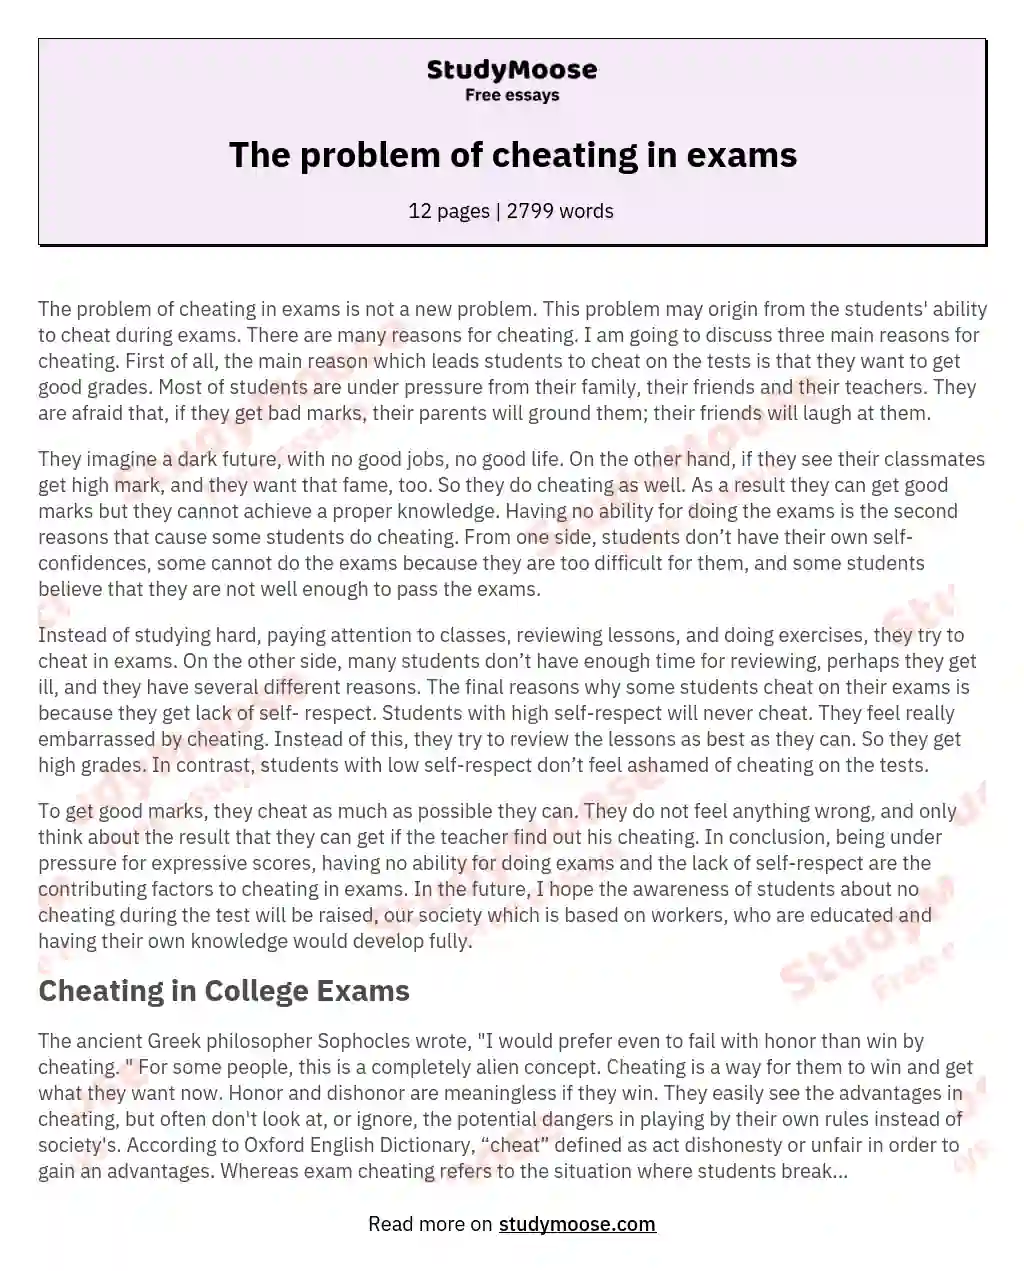 The problem of cheating in exams